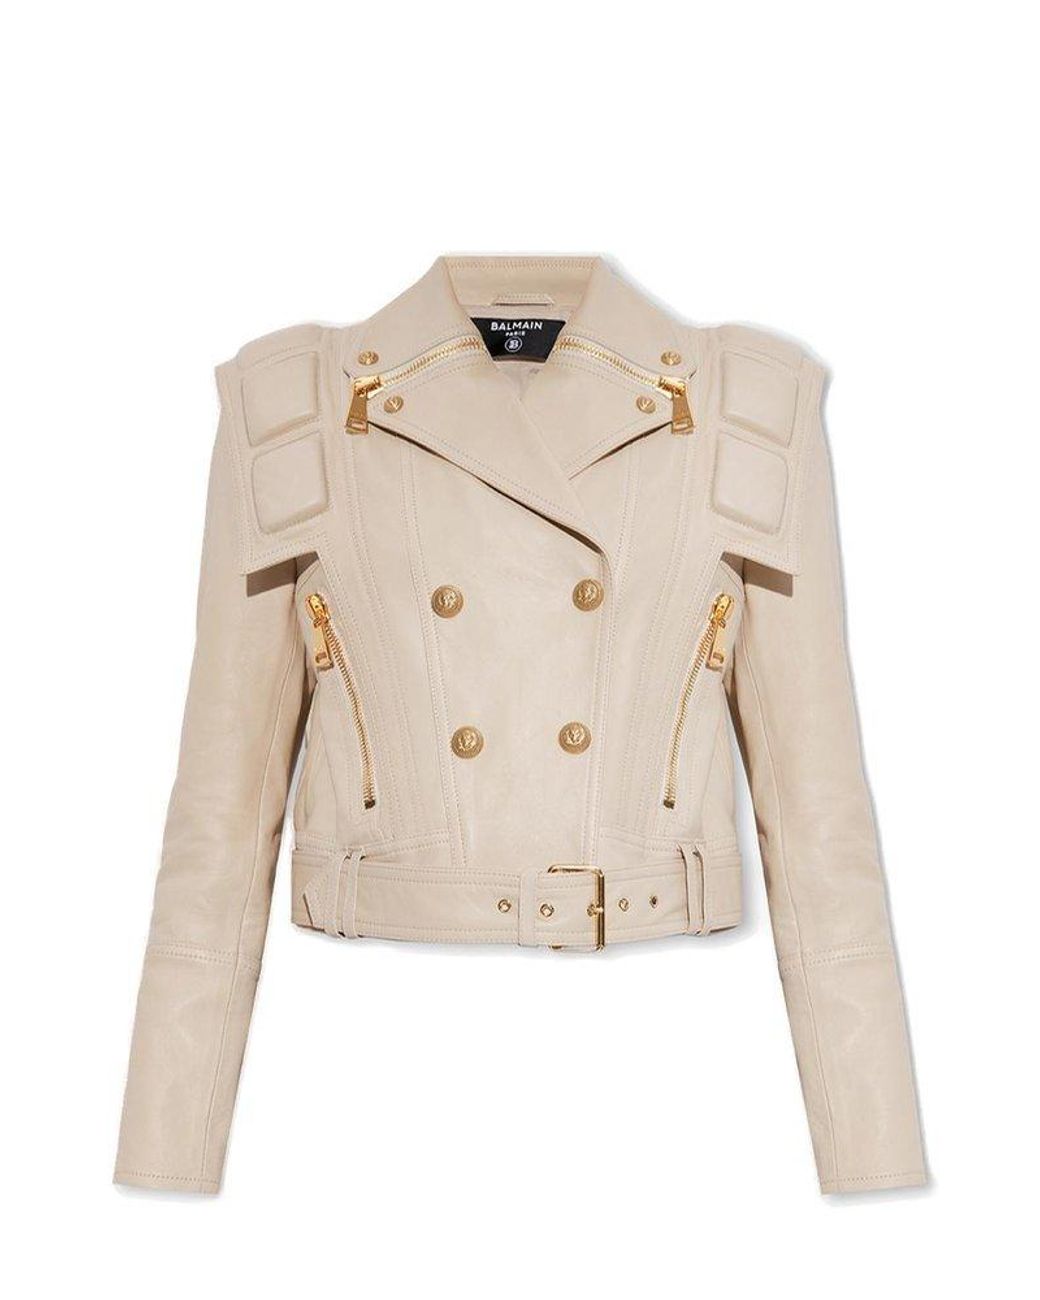 Balmain Double Breasted Leather Jacket in Natural | Lyst